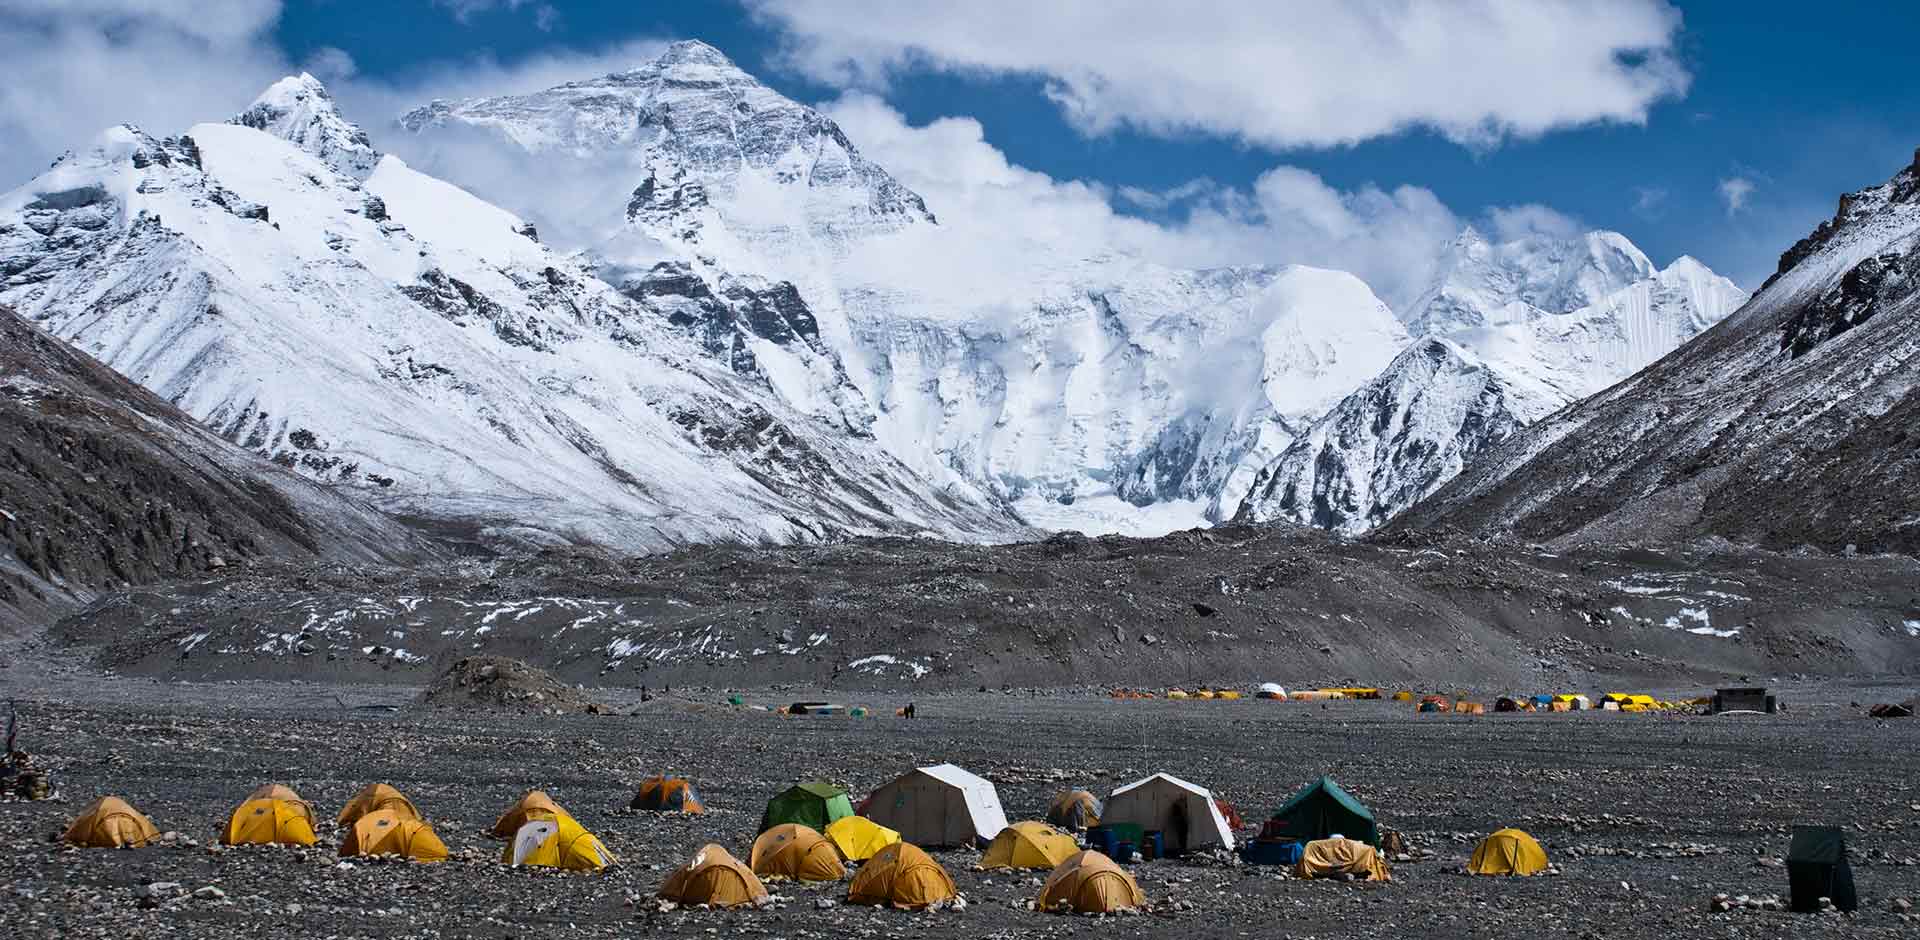 This New Mt. Everest Trek Offers Luxe Amenities and Hearty Meals